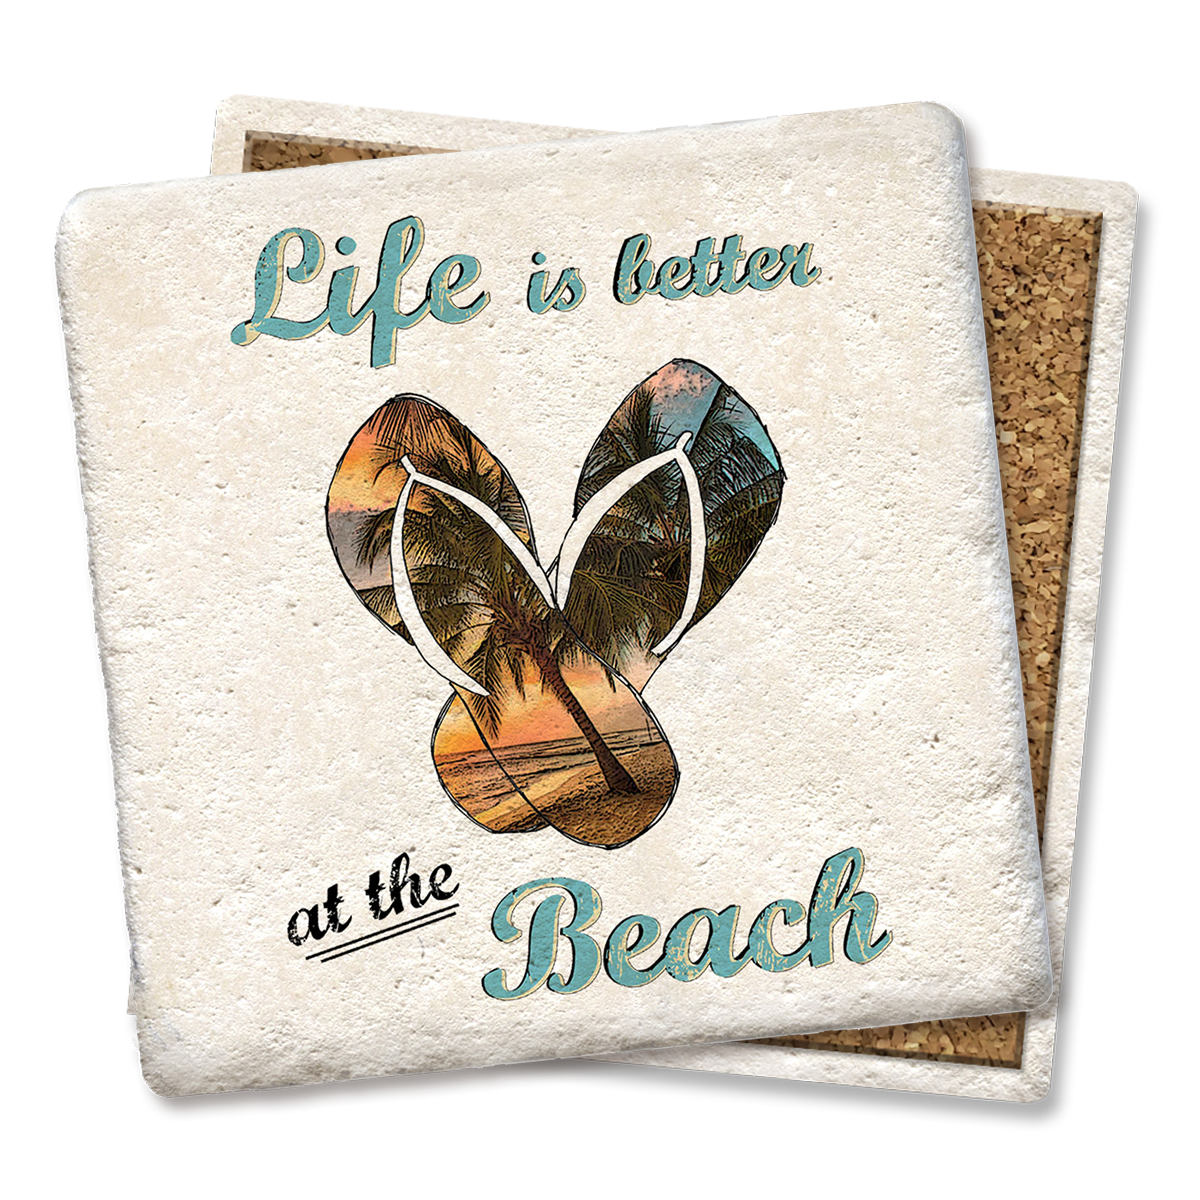 Life Is Better at the Beach Coaster  Tipsy Coasters & Gifts   